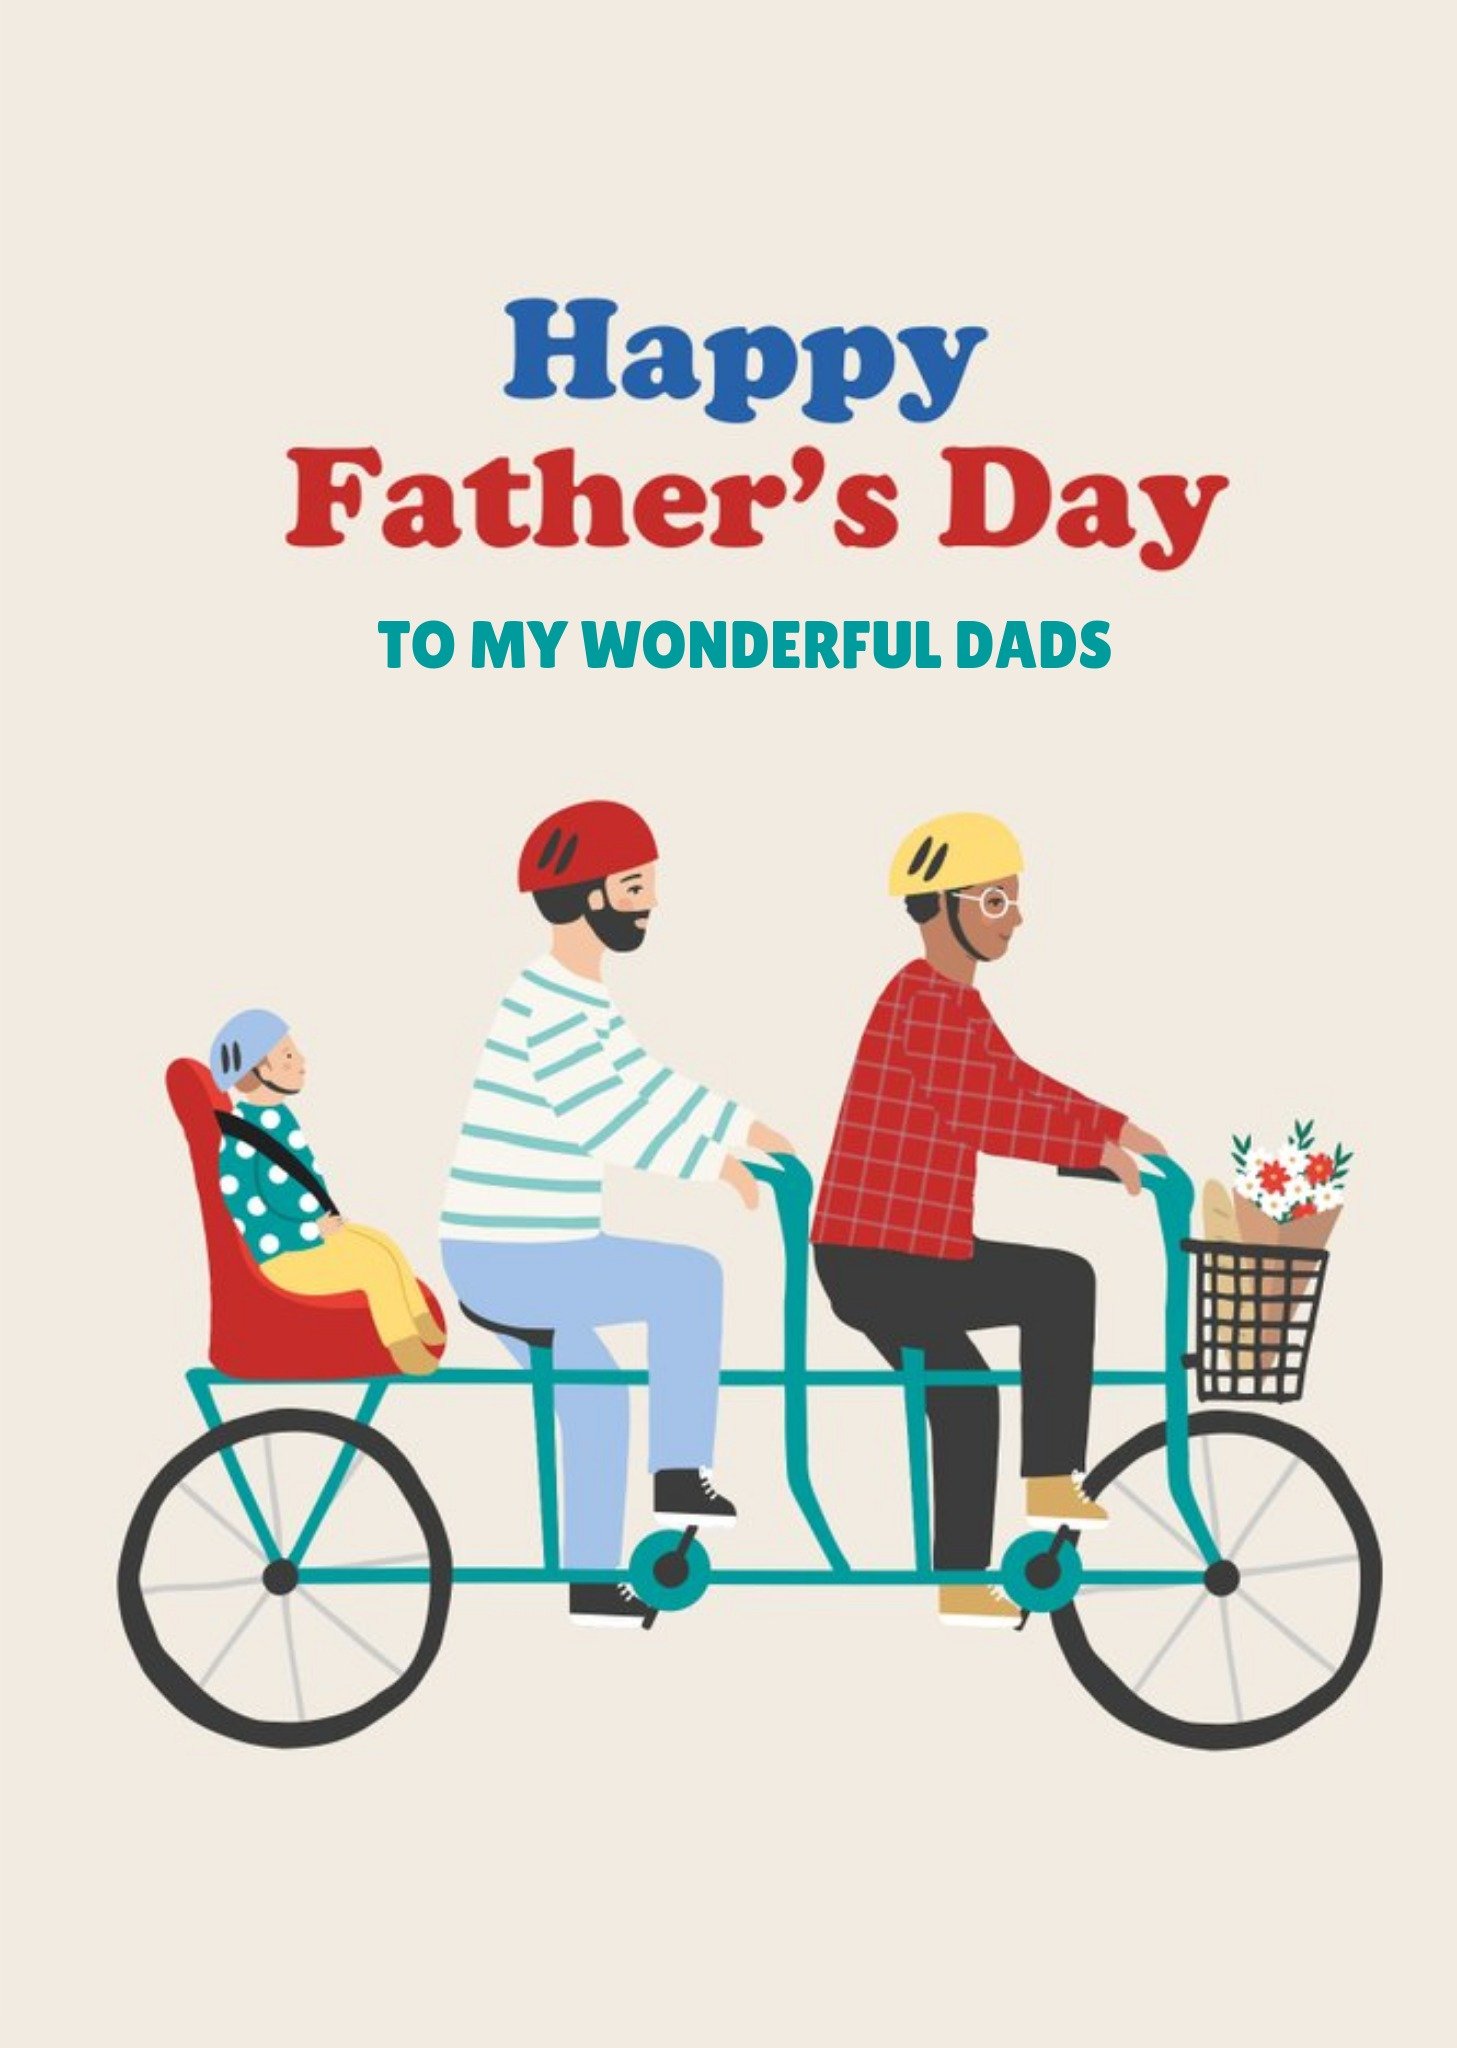 Moonpig Illustrated Tandem Bicycle To My Wonderful Dads Father's Day Card Ecard